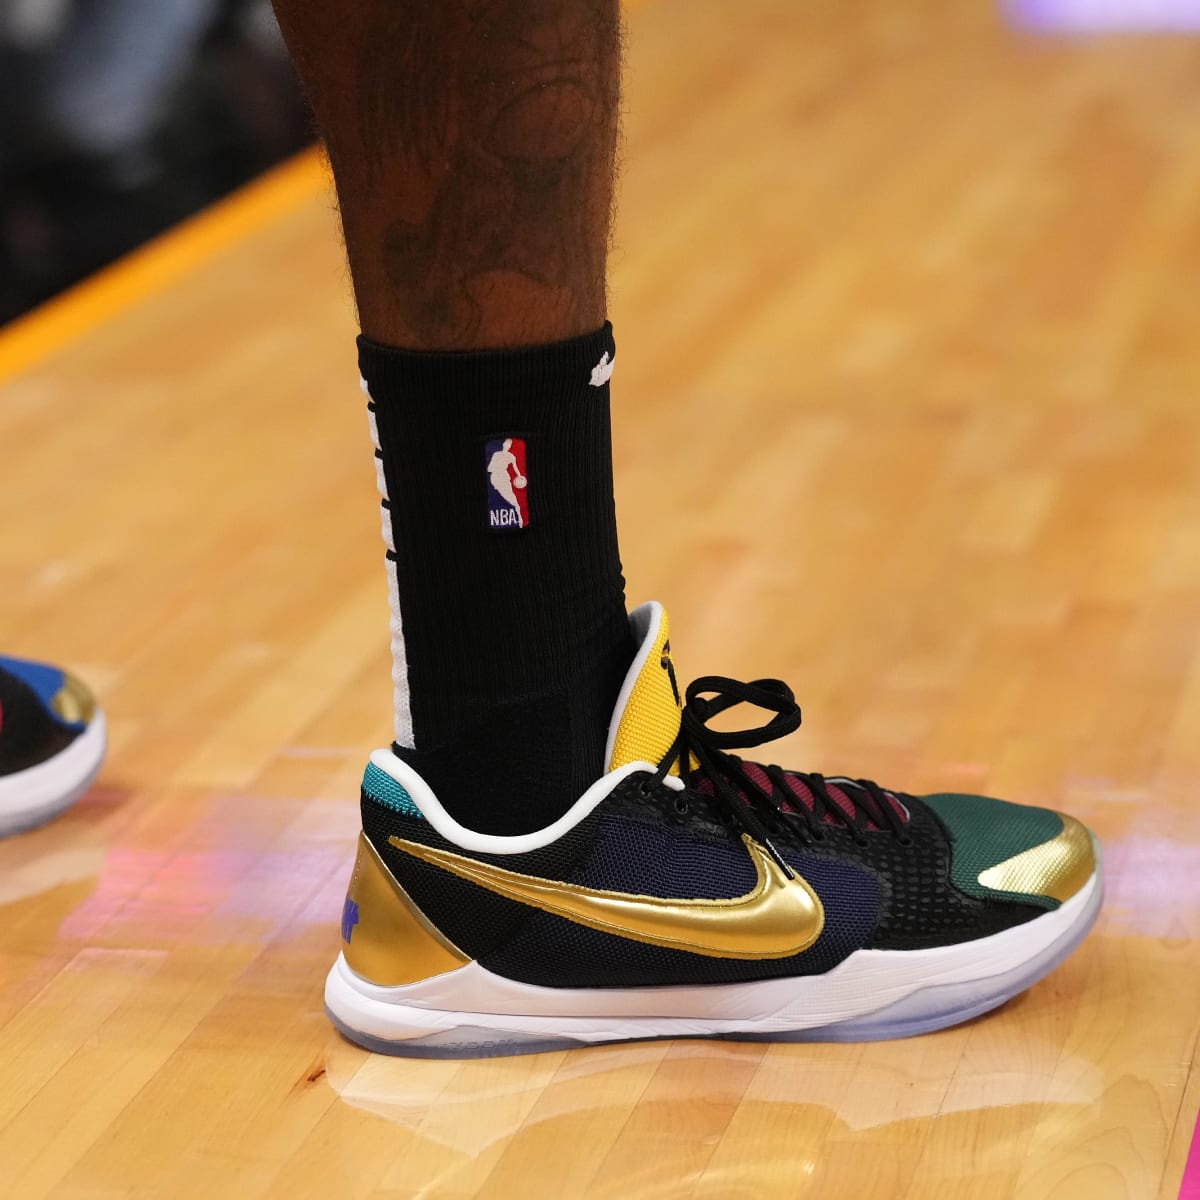 Why is Paul George wearing Kobes instead of his signature shoe